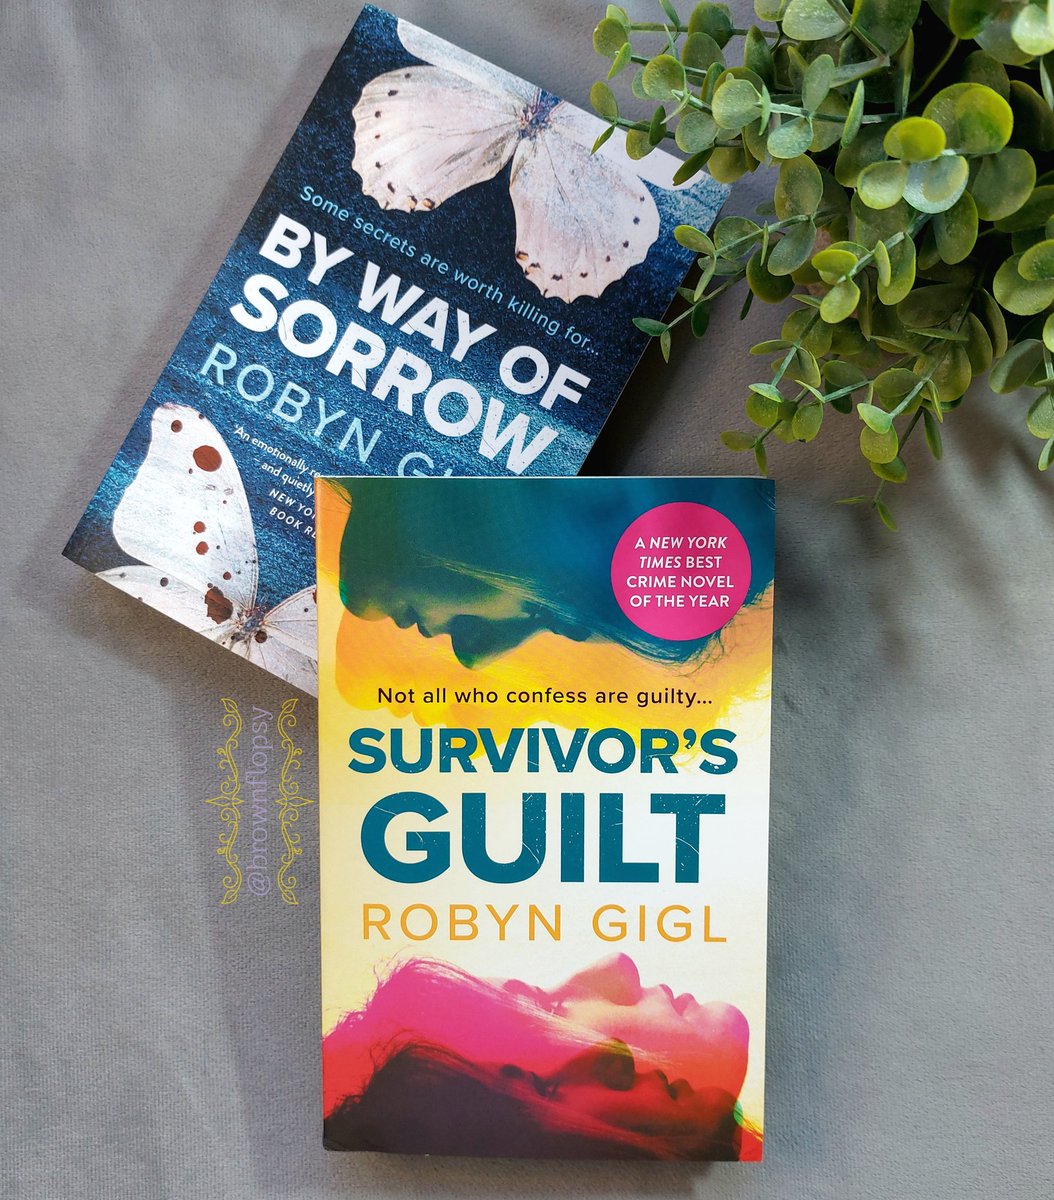 Thank you @VERVE_Books for this fab copy of #SurvivorsGuilt by @robyngigl - book two in the gripping Erin McCabe series, following on from the ground-breaking #ByWayOfSorrow ⚖
Publishing 7th Dec and available for preorder now!
#BlogTour coming soon! 🤩